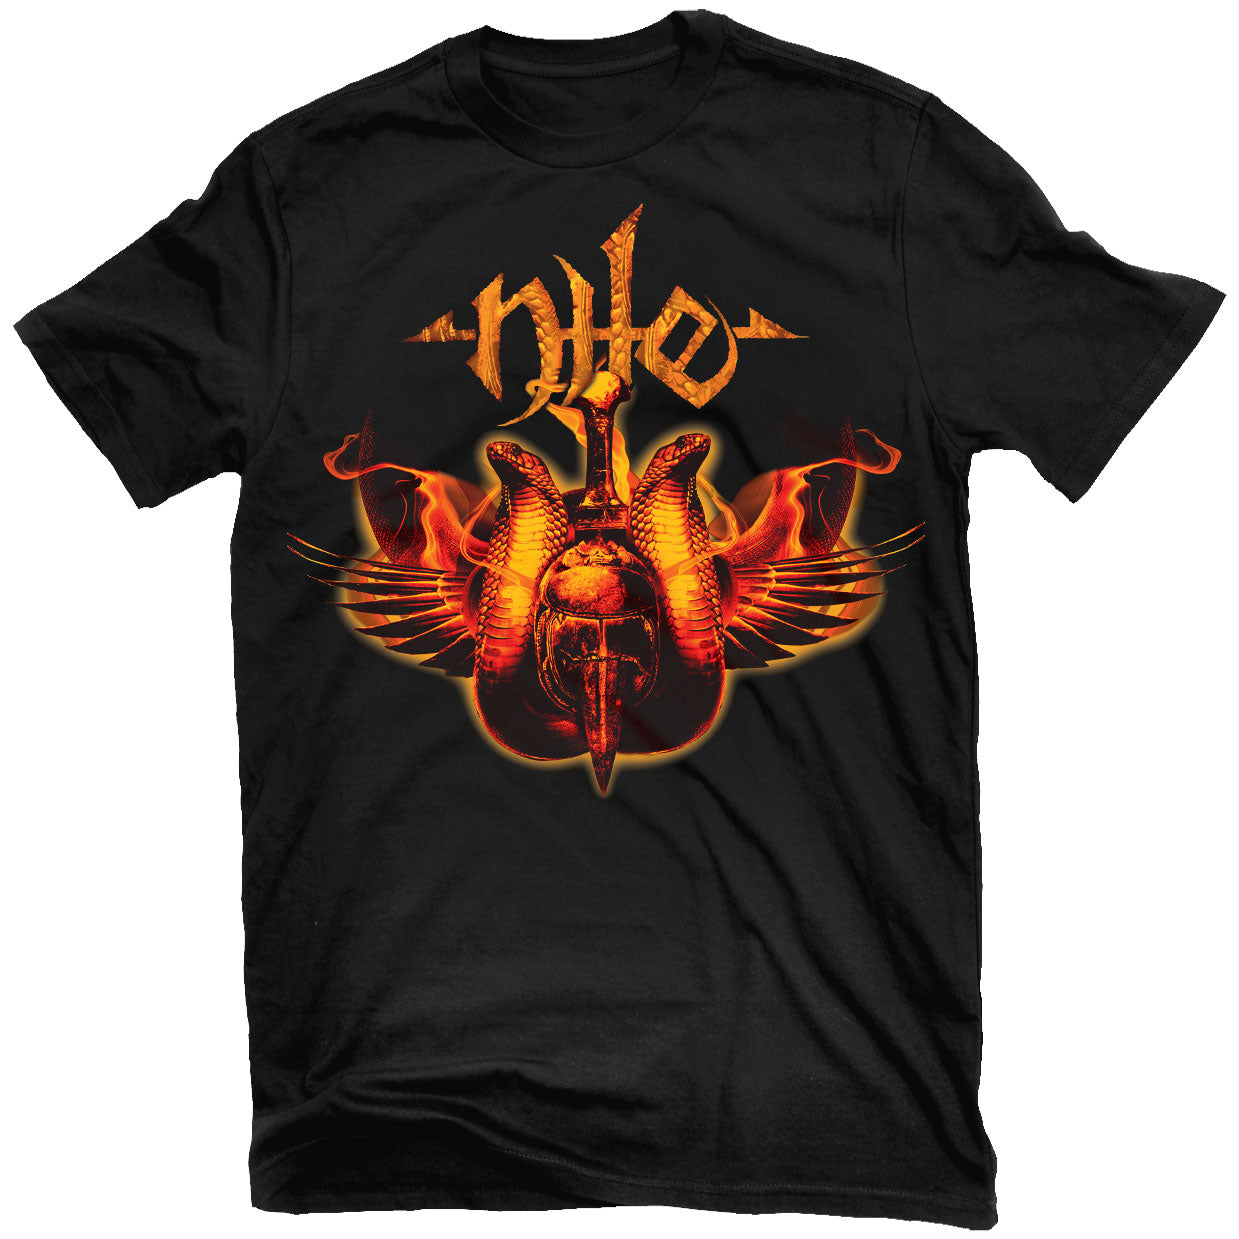 Nile "Annihilation of the Wicked" T-Shirt